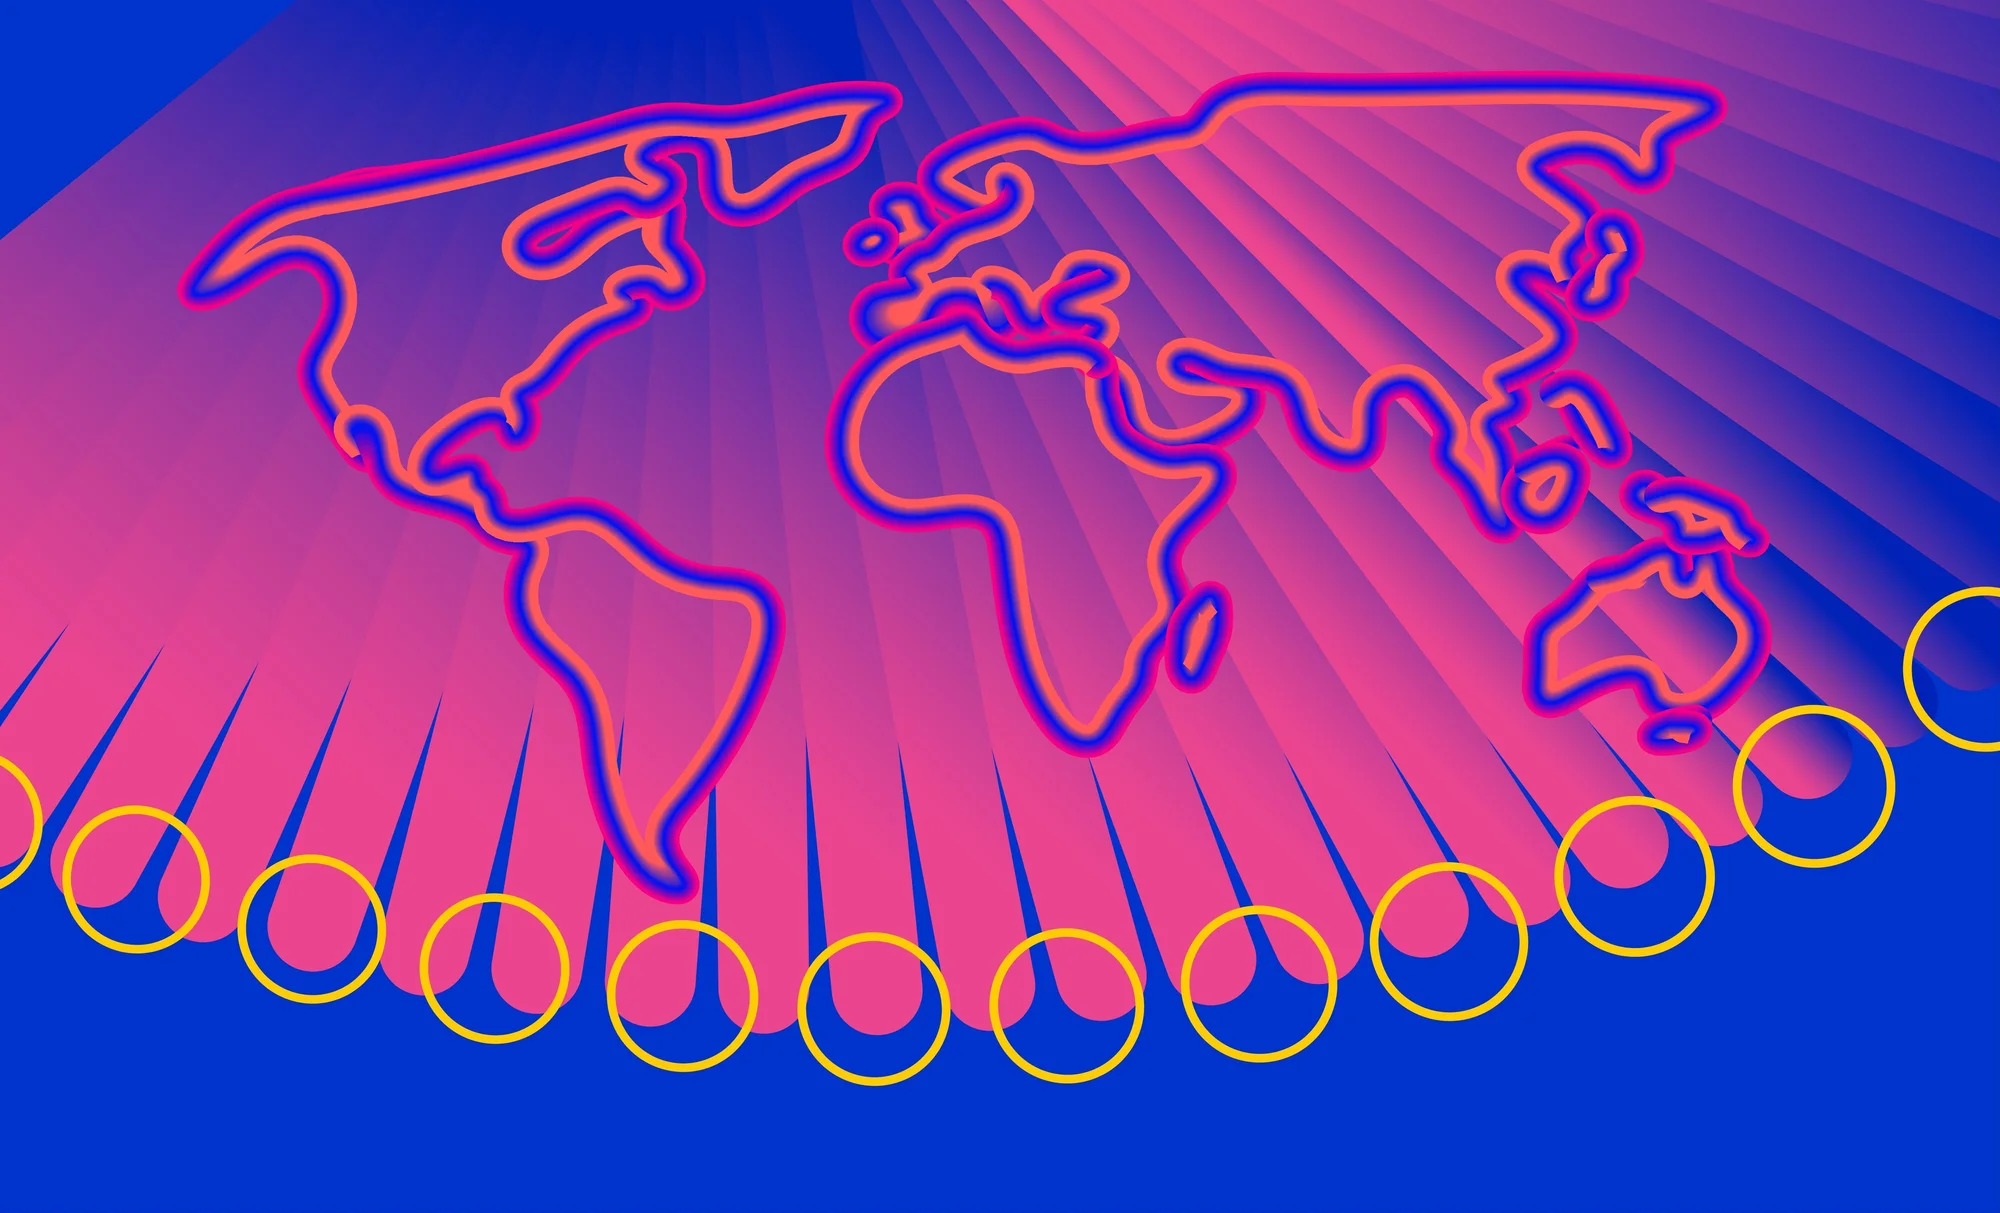 Map of the world drawn with wavy lines in pink and blue.